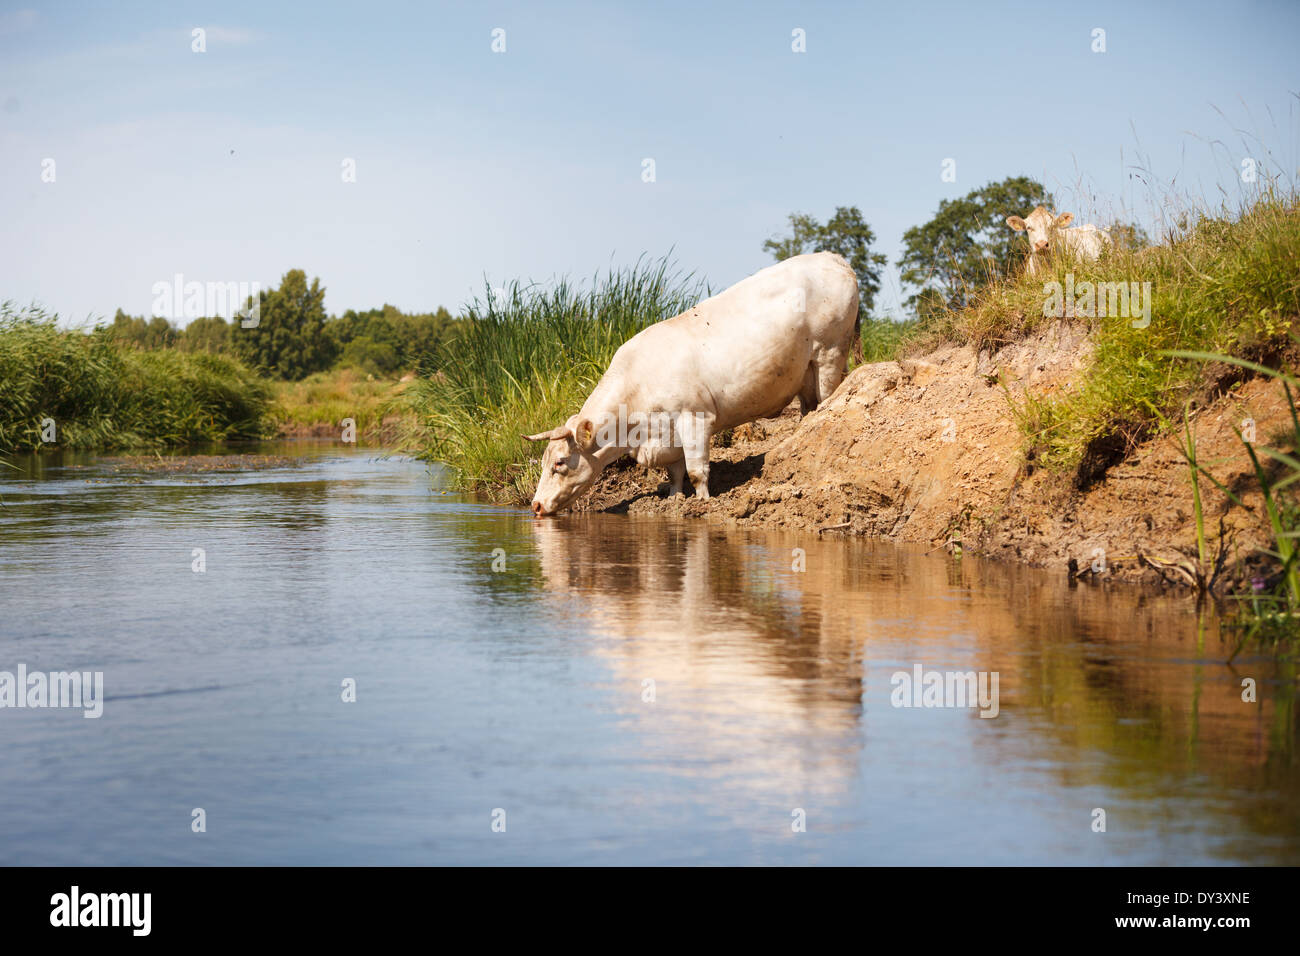 White cow drinking stright from river, eco sustainable farming Stock Photo